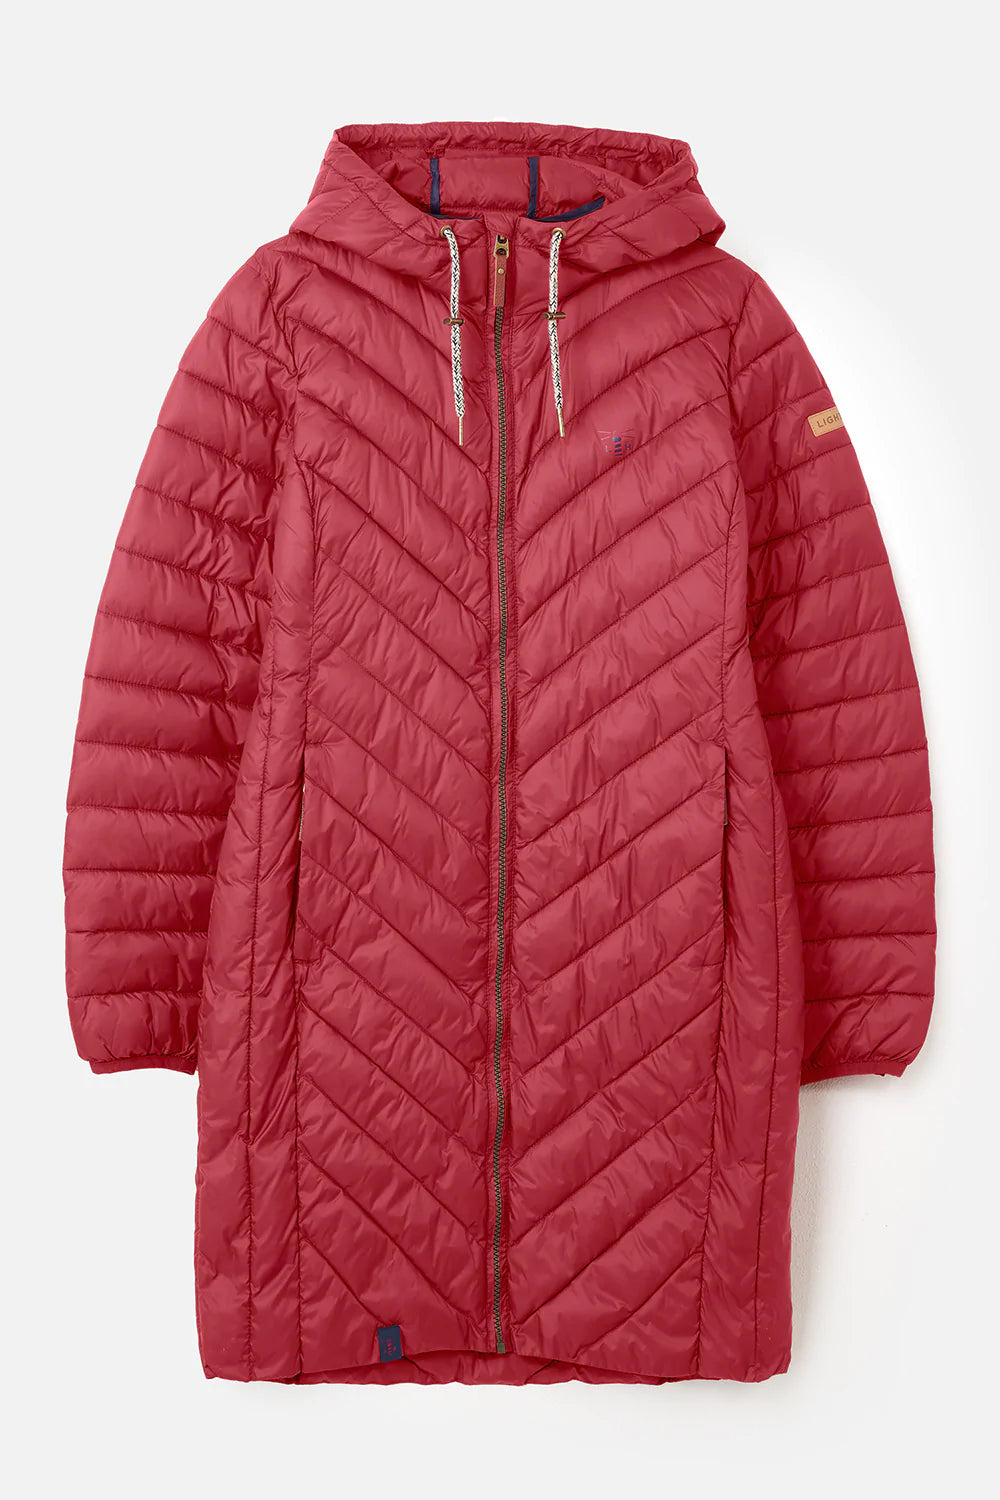 Lighthouse Laurel Mid-Length Coat in Redcurrant